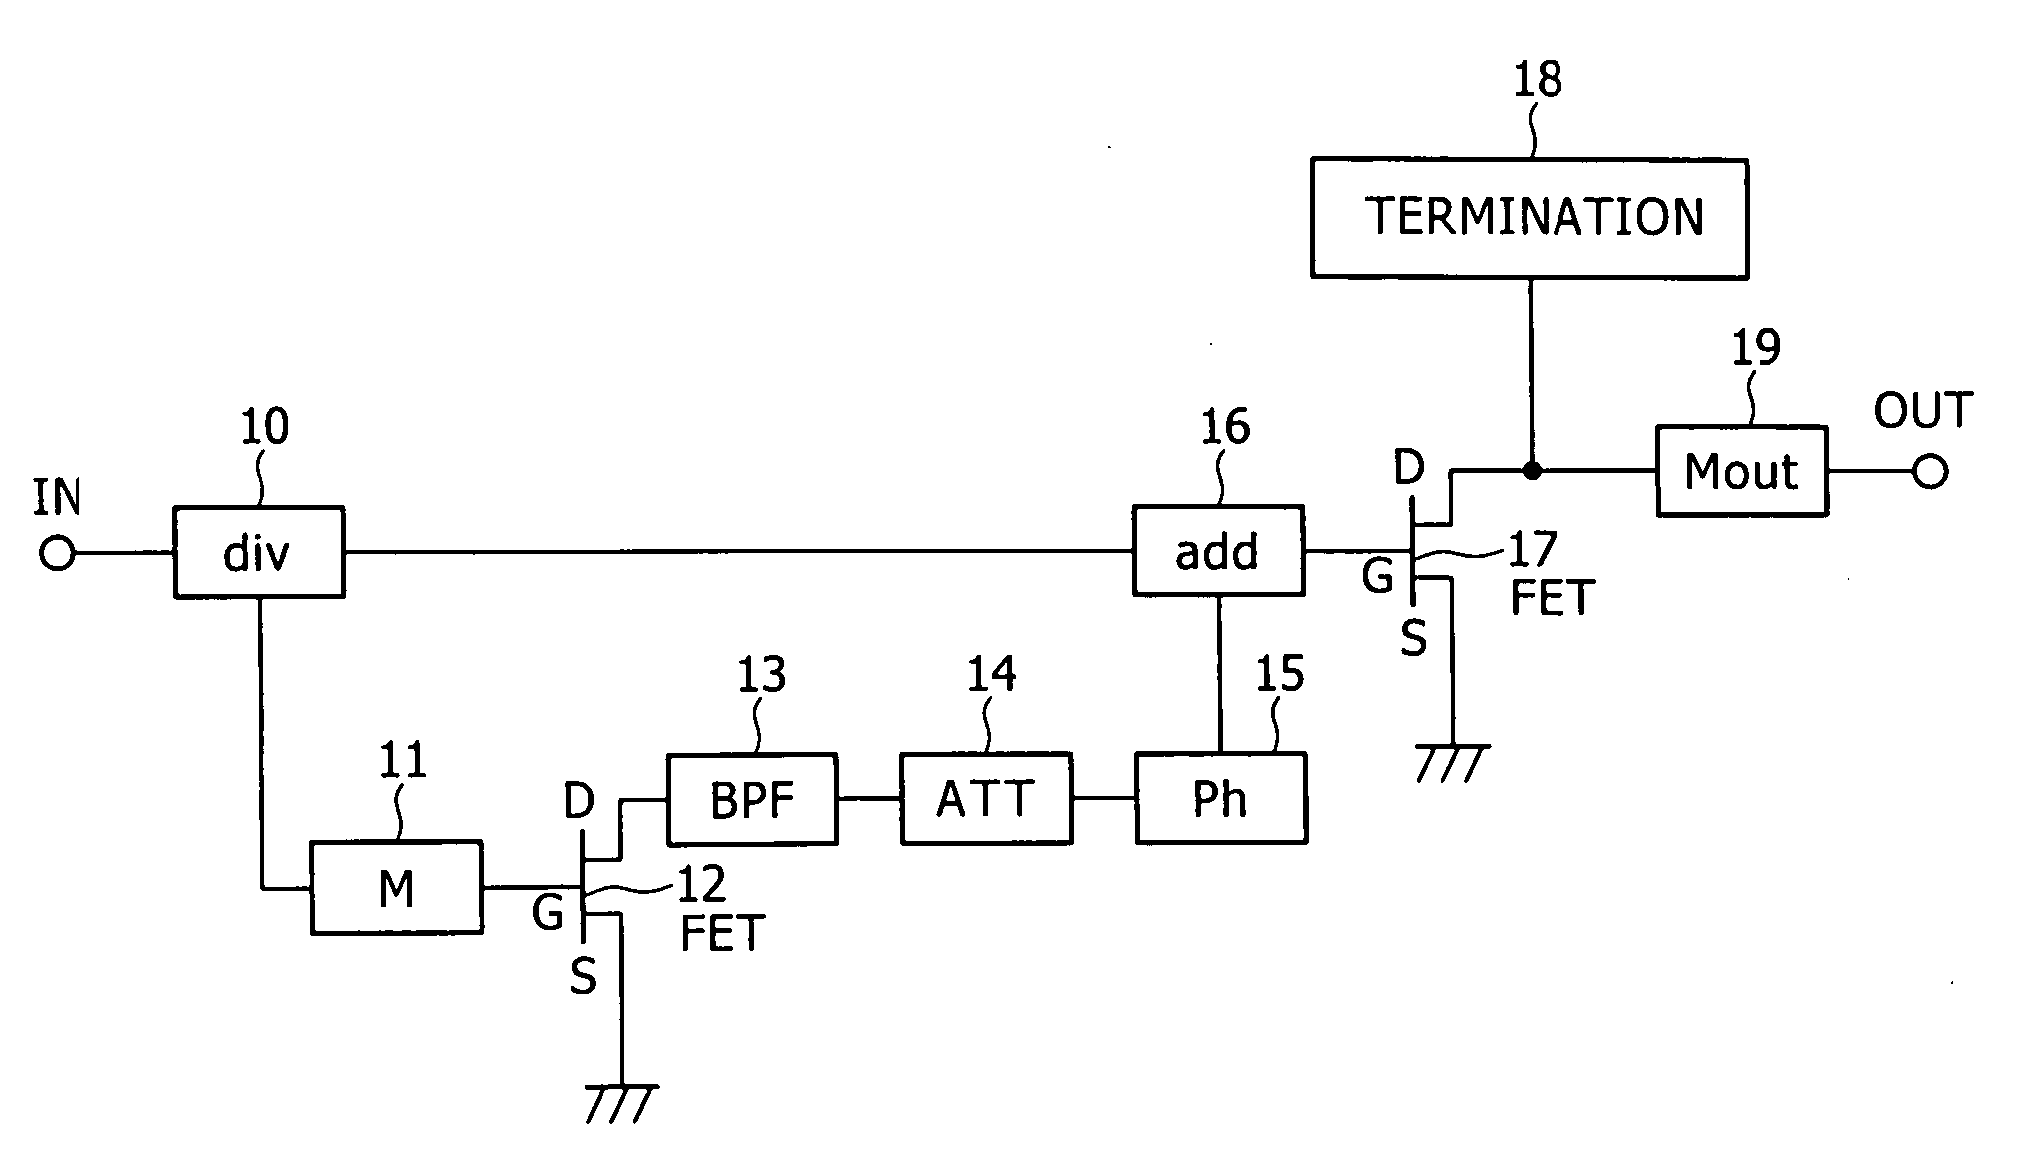 Distortion compensating and power amplifying apparatus